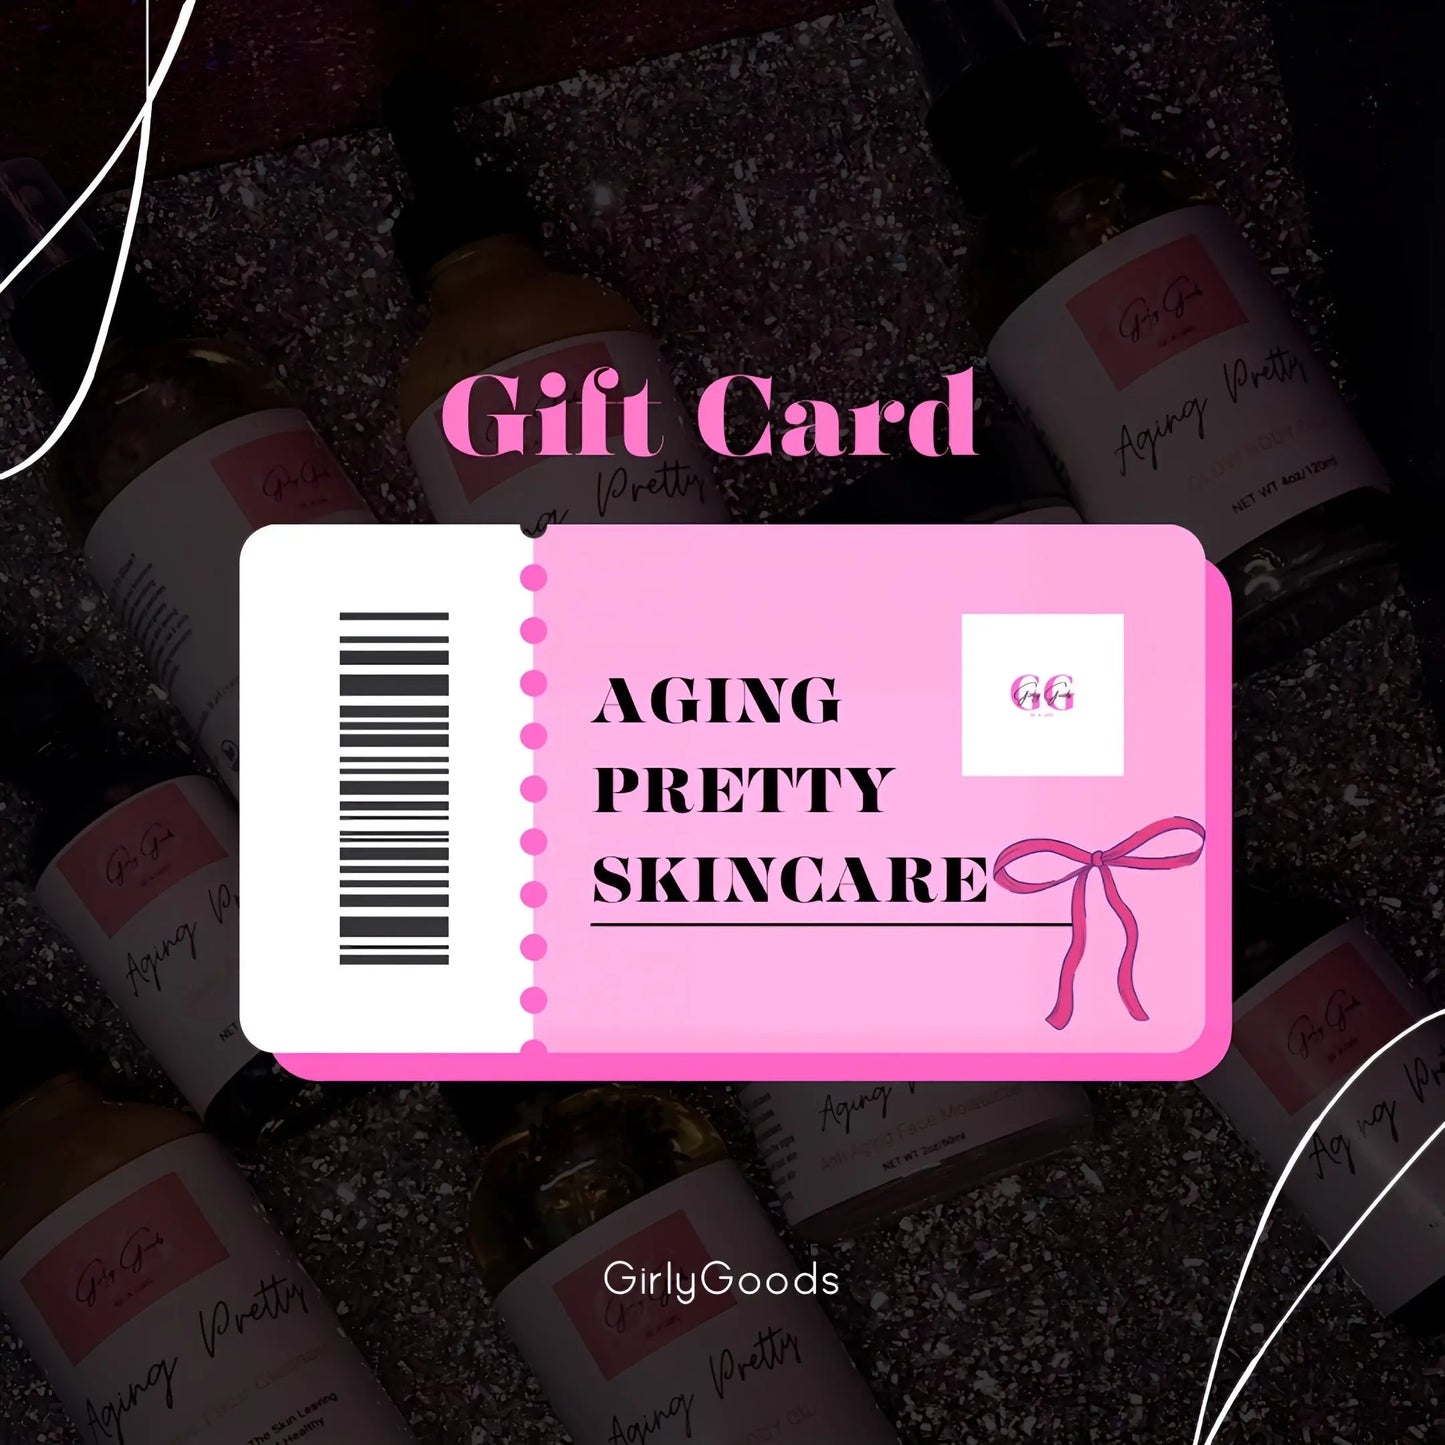 AgingPretty GiftCard Girly Goods